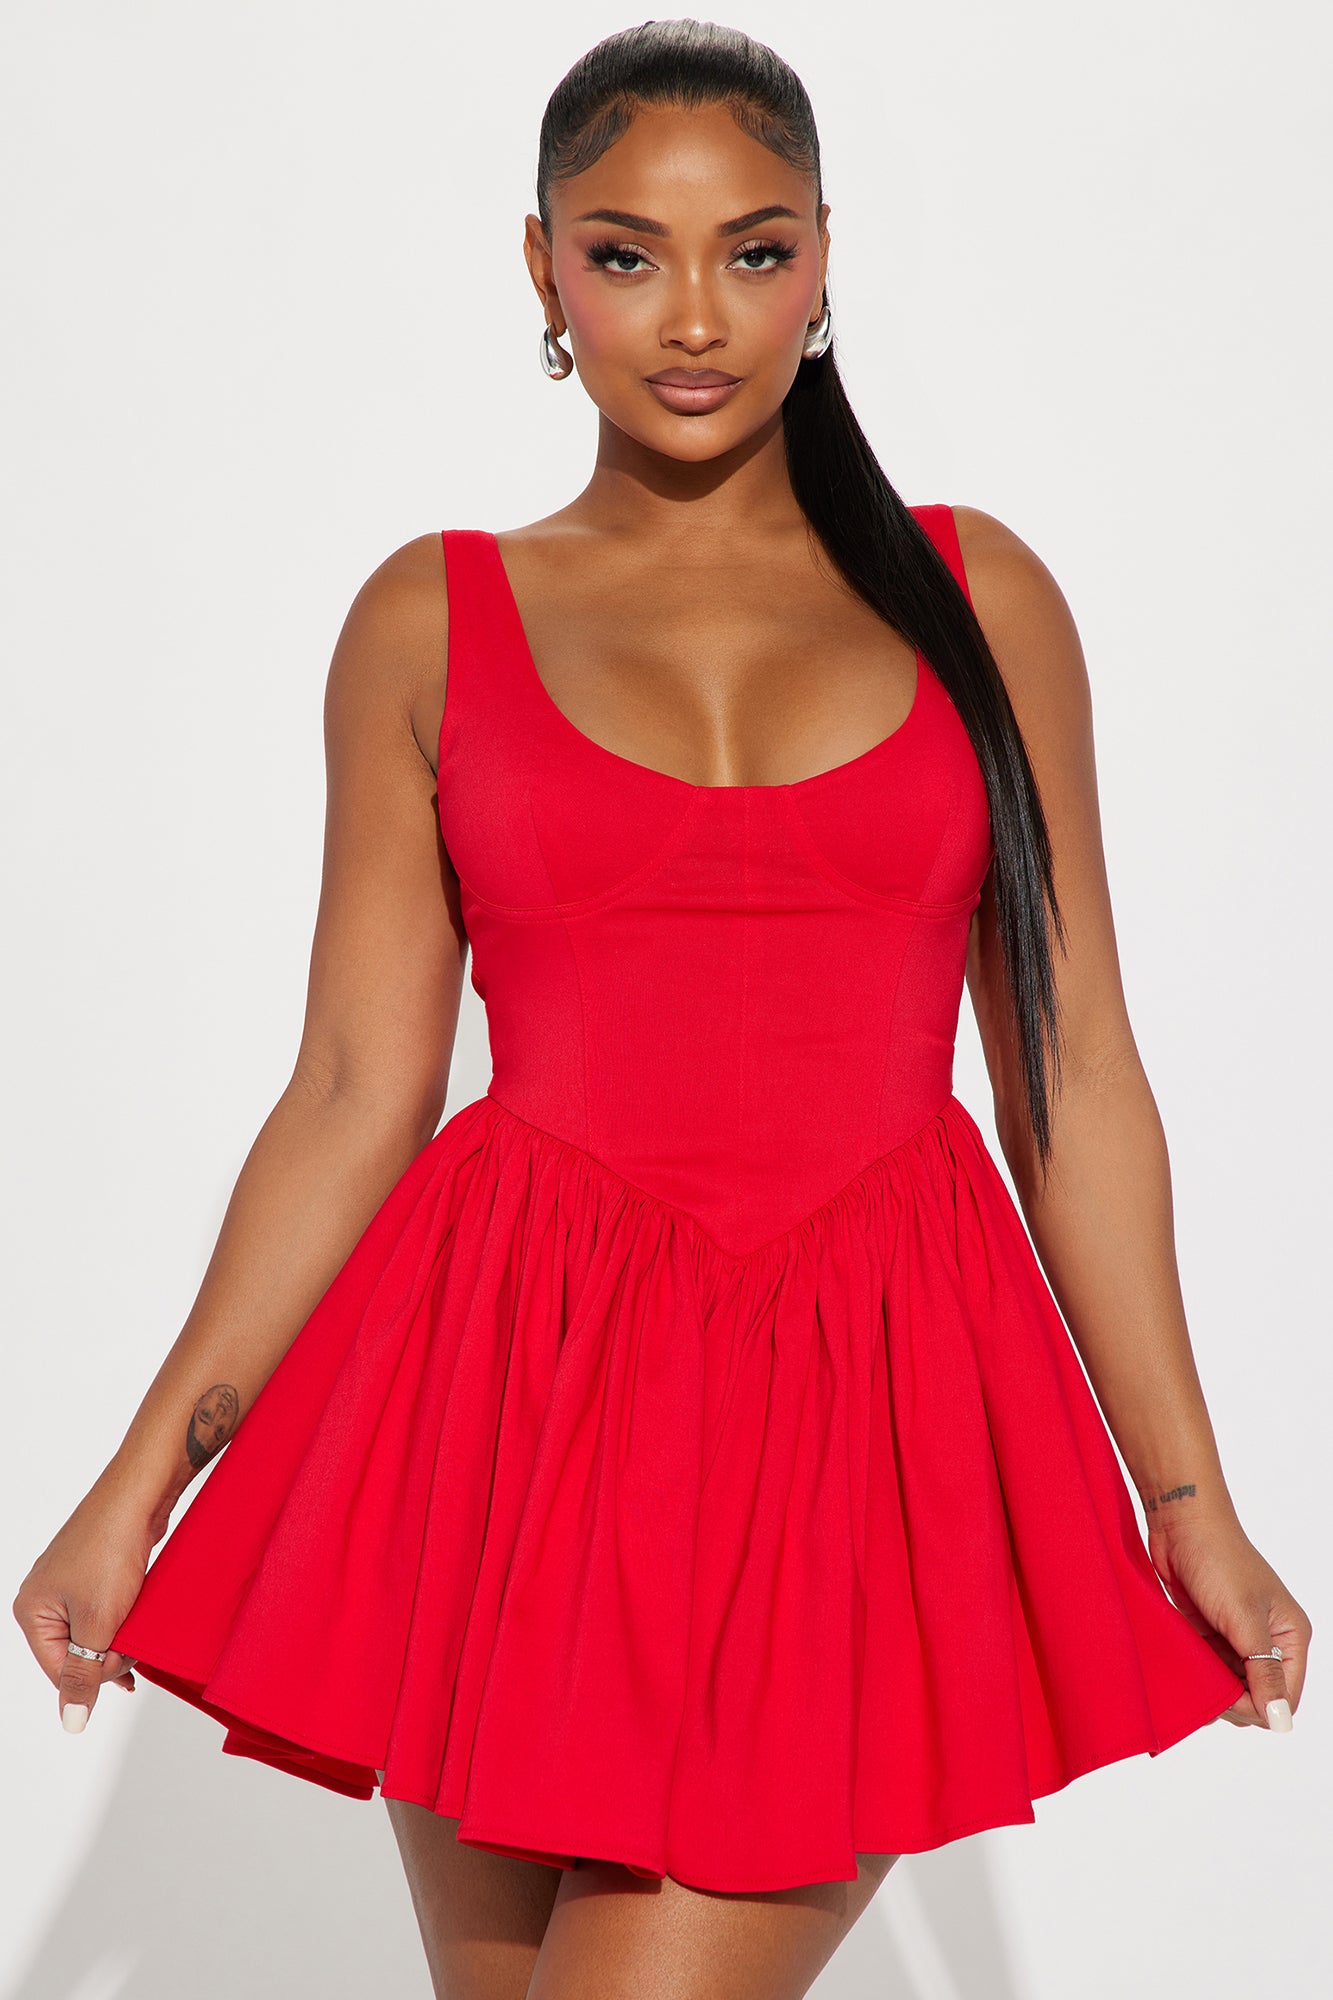 20+ Elegant Red Dresses For Valentines Day Outfit